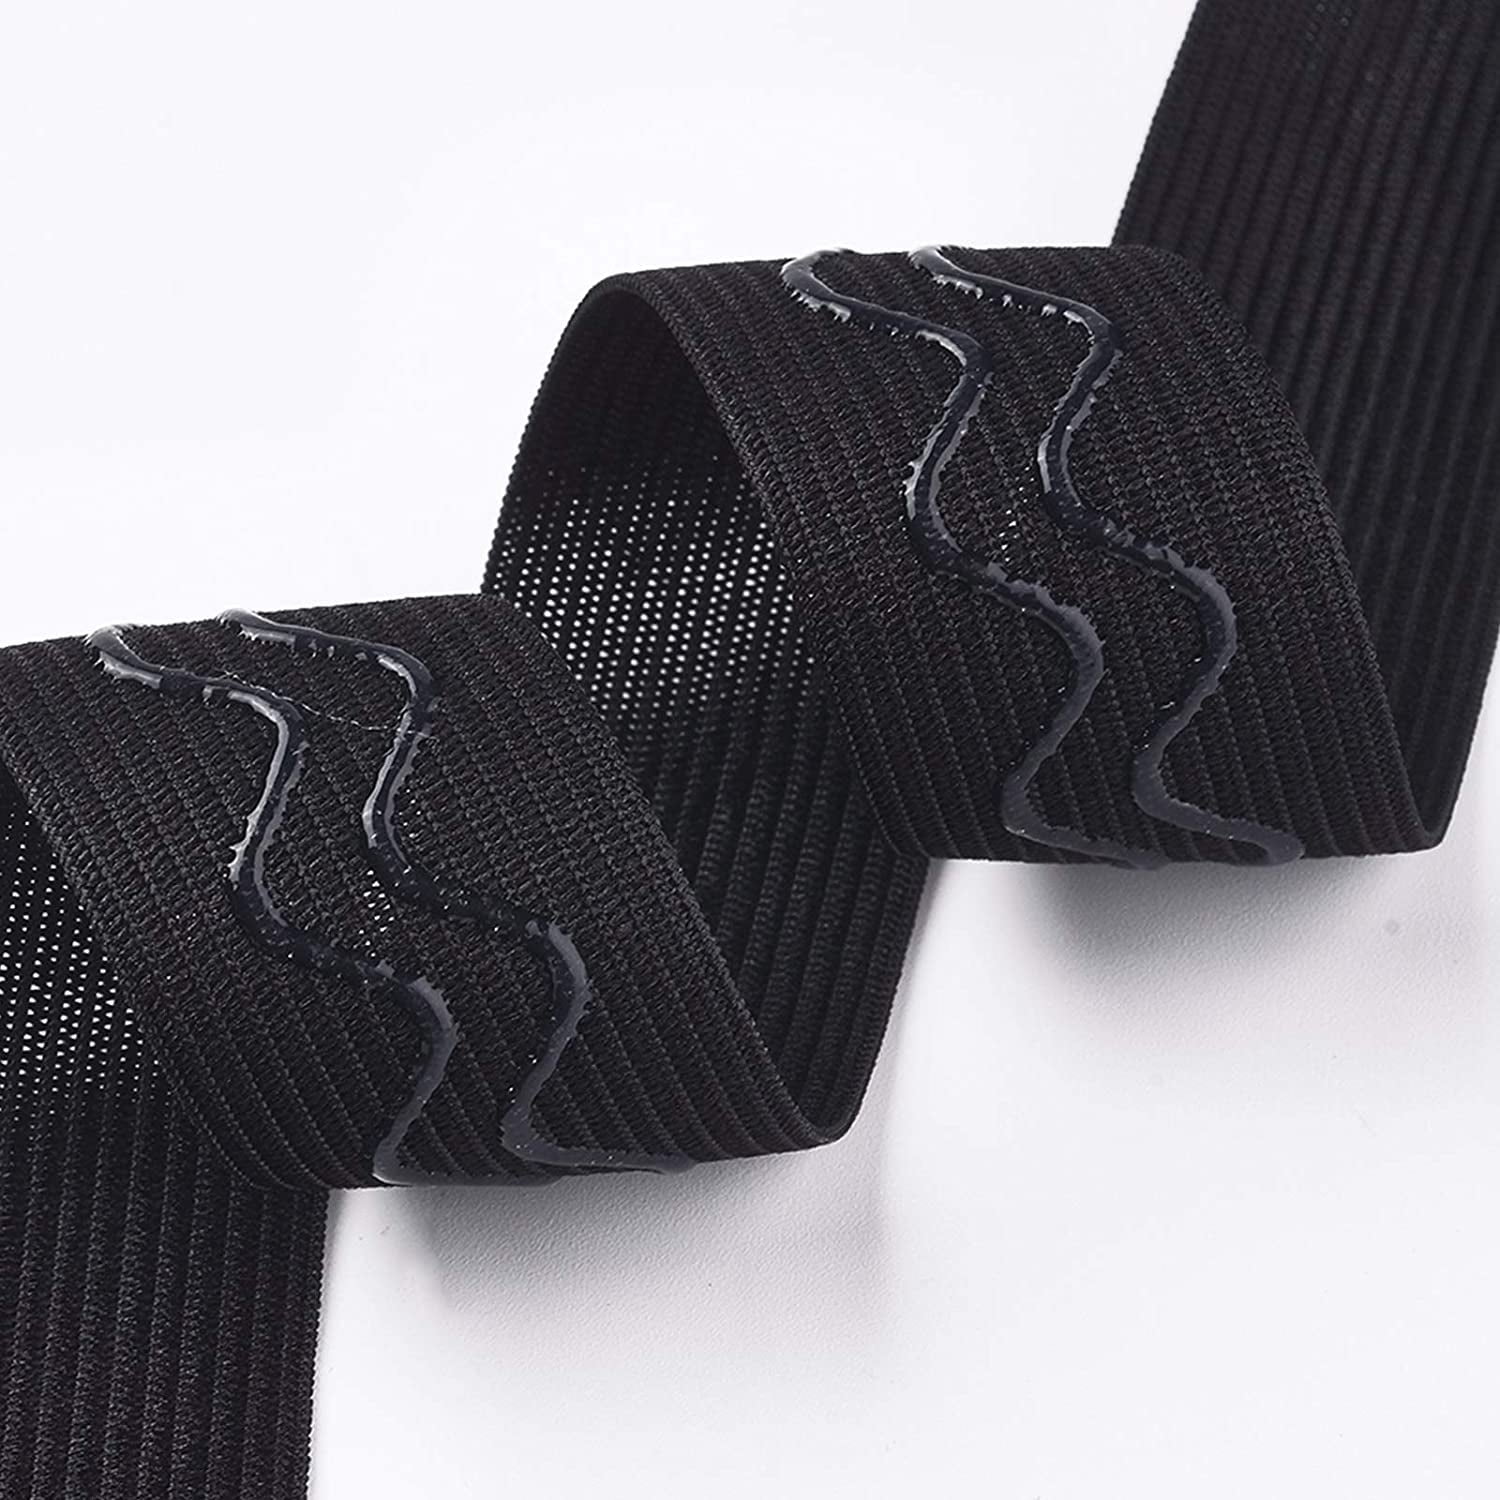 Difenni Silicone Gripper Elastic Band Non-Slip Elastic Band 5 Yards 1.5 inch Black Silicone Gripper Tape for Clothing Elastic Gripper Band for